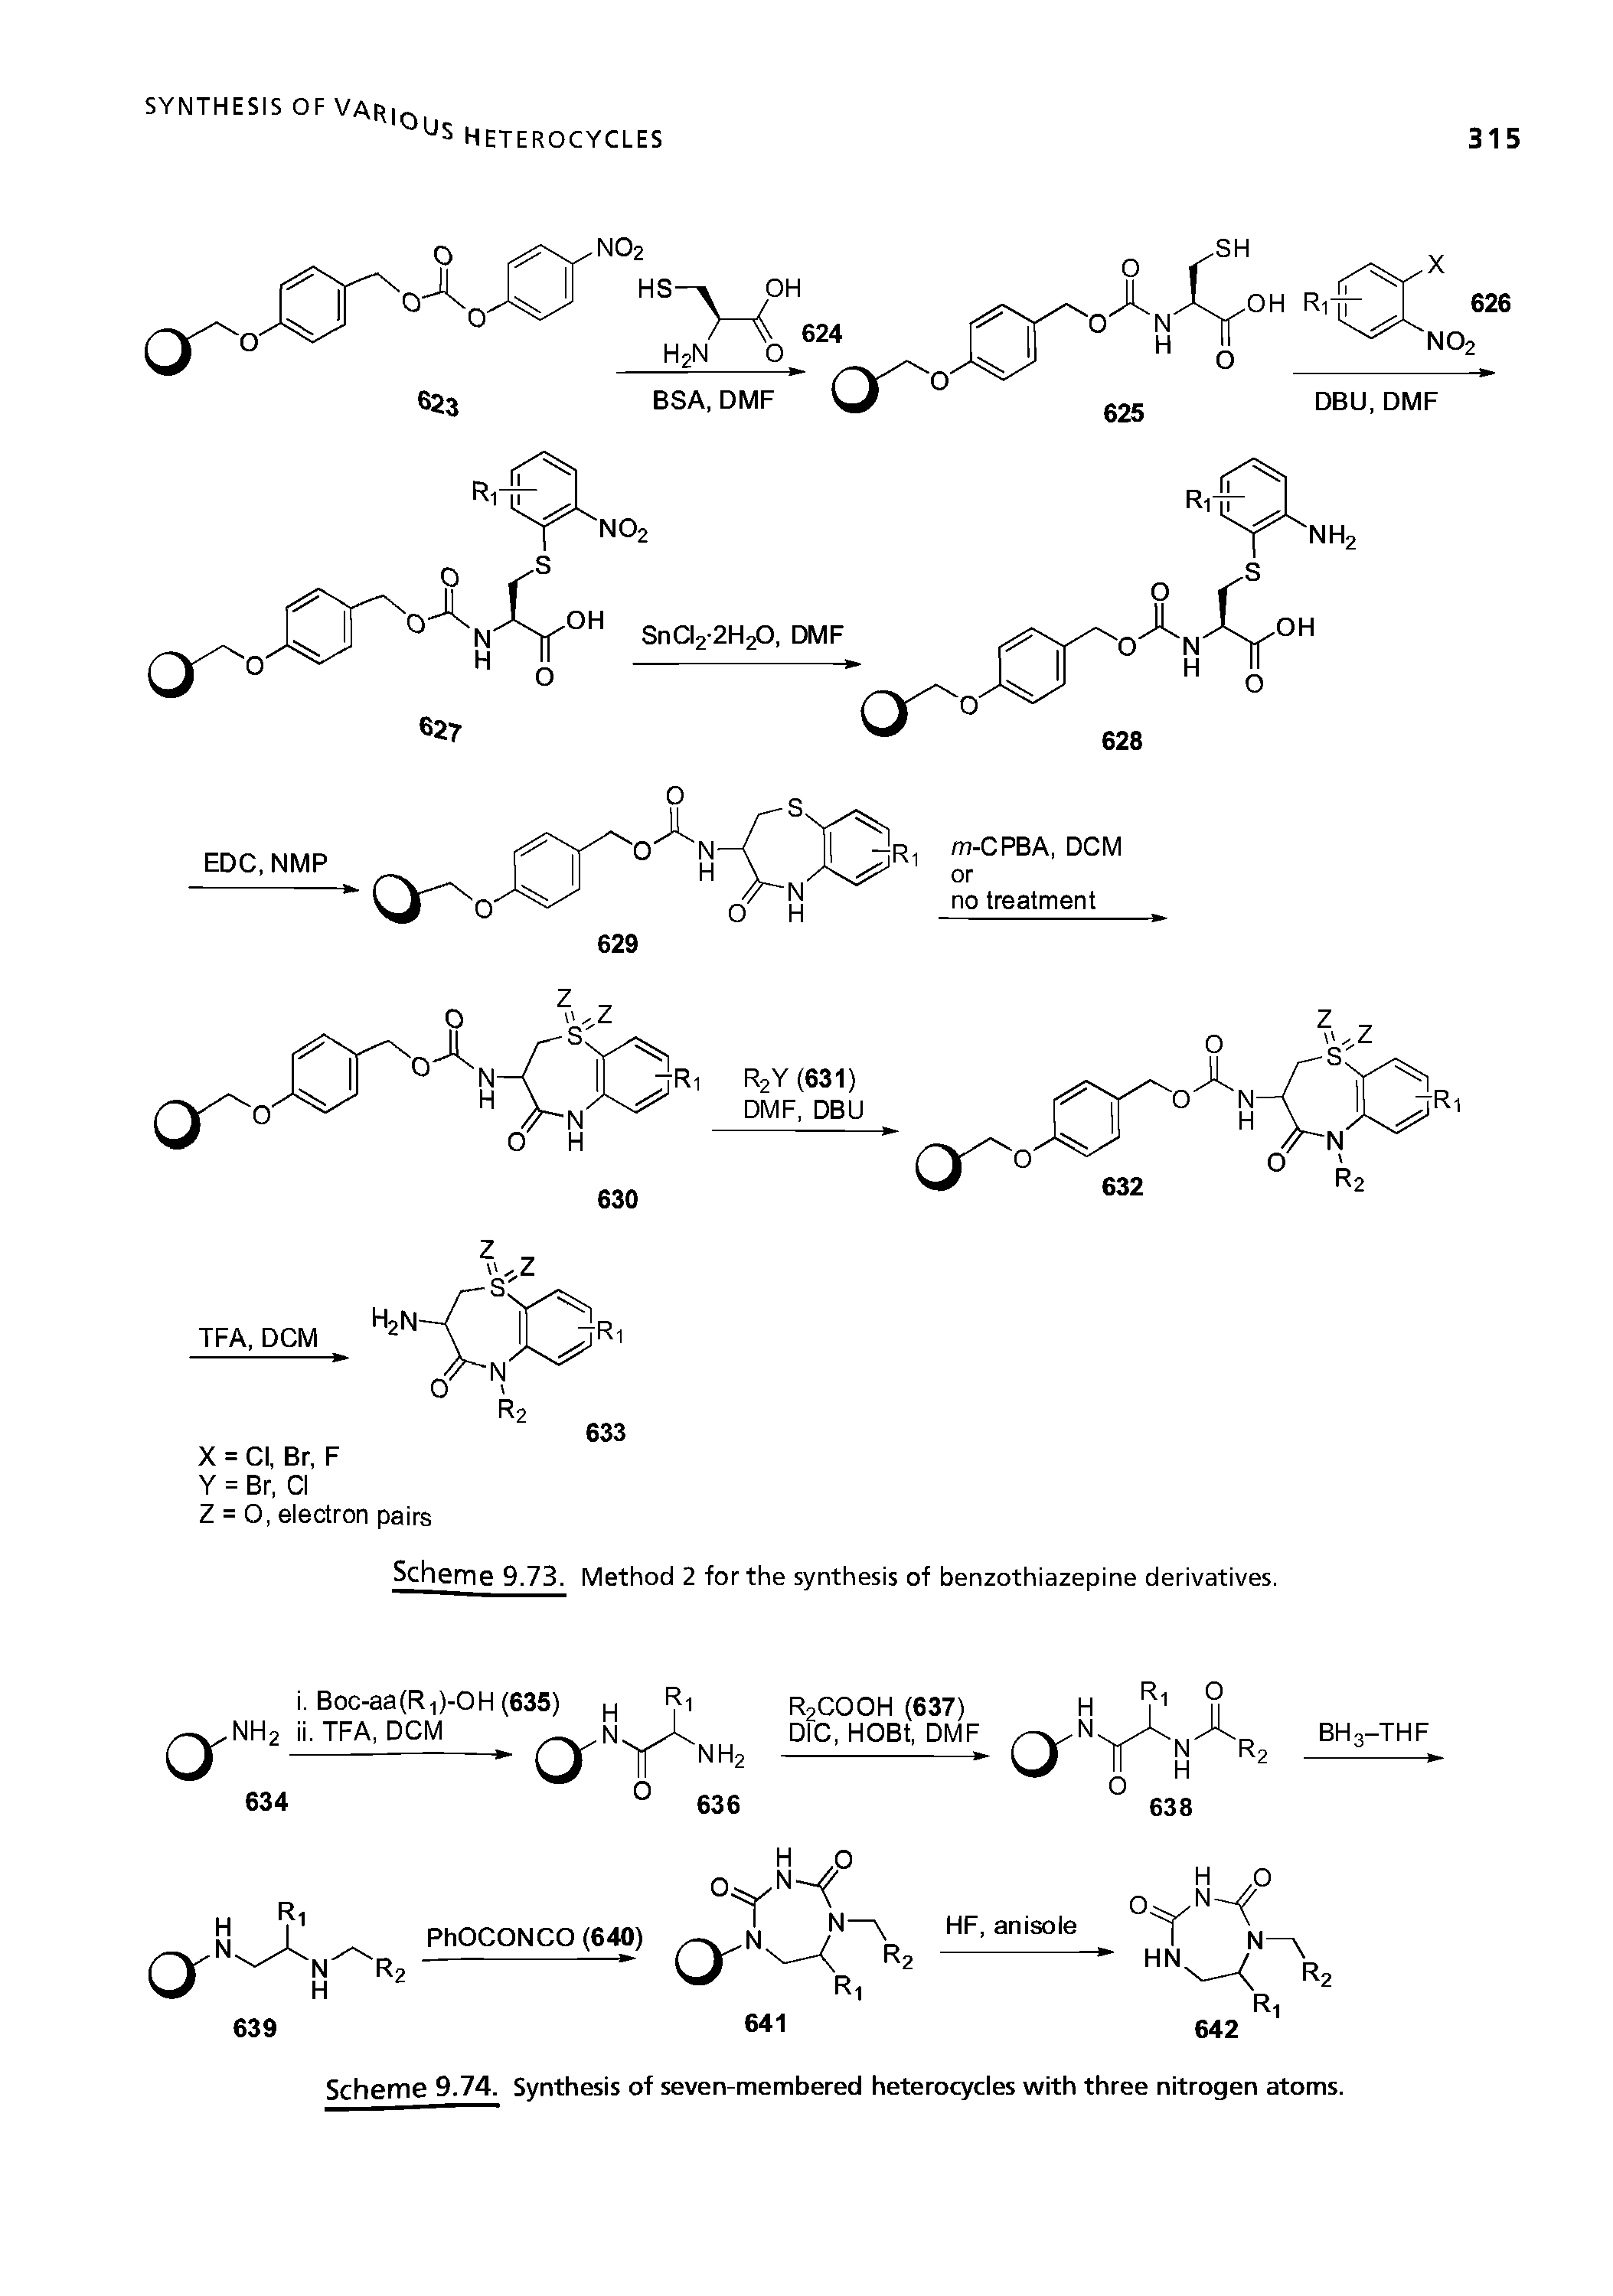 Scheme 9.74. Synthesis of seven-membered heterocycles with three nitrogen atoms.